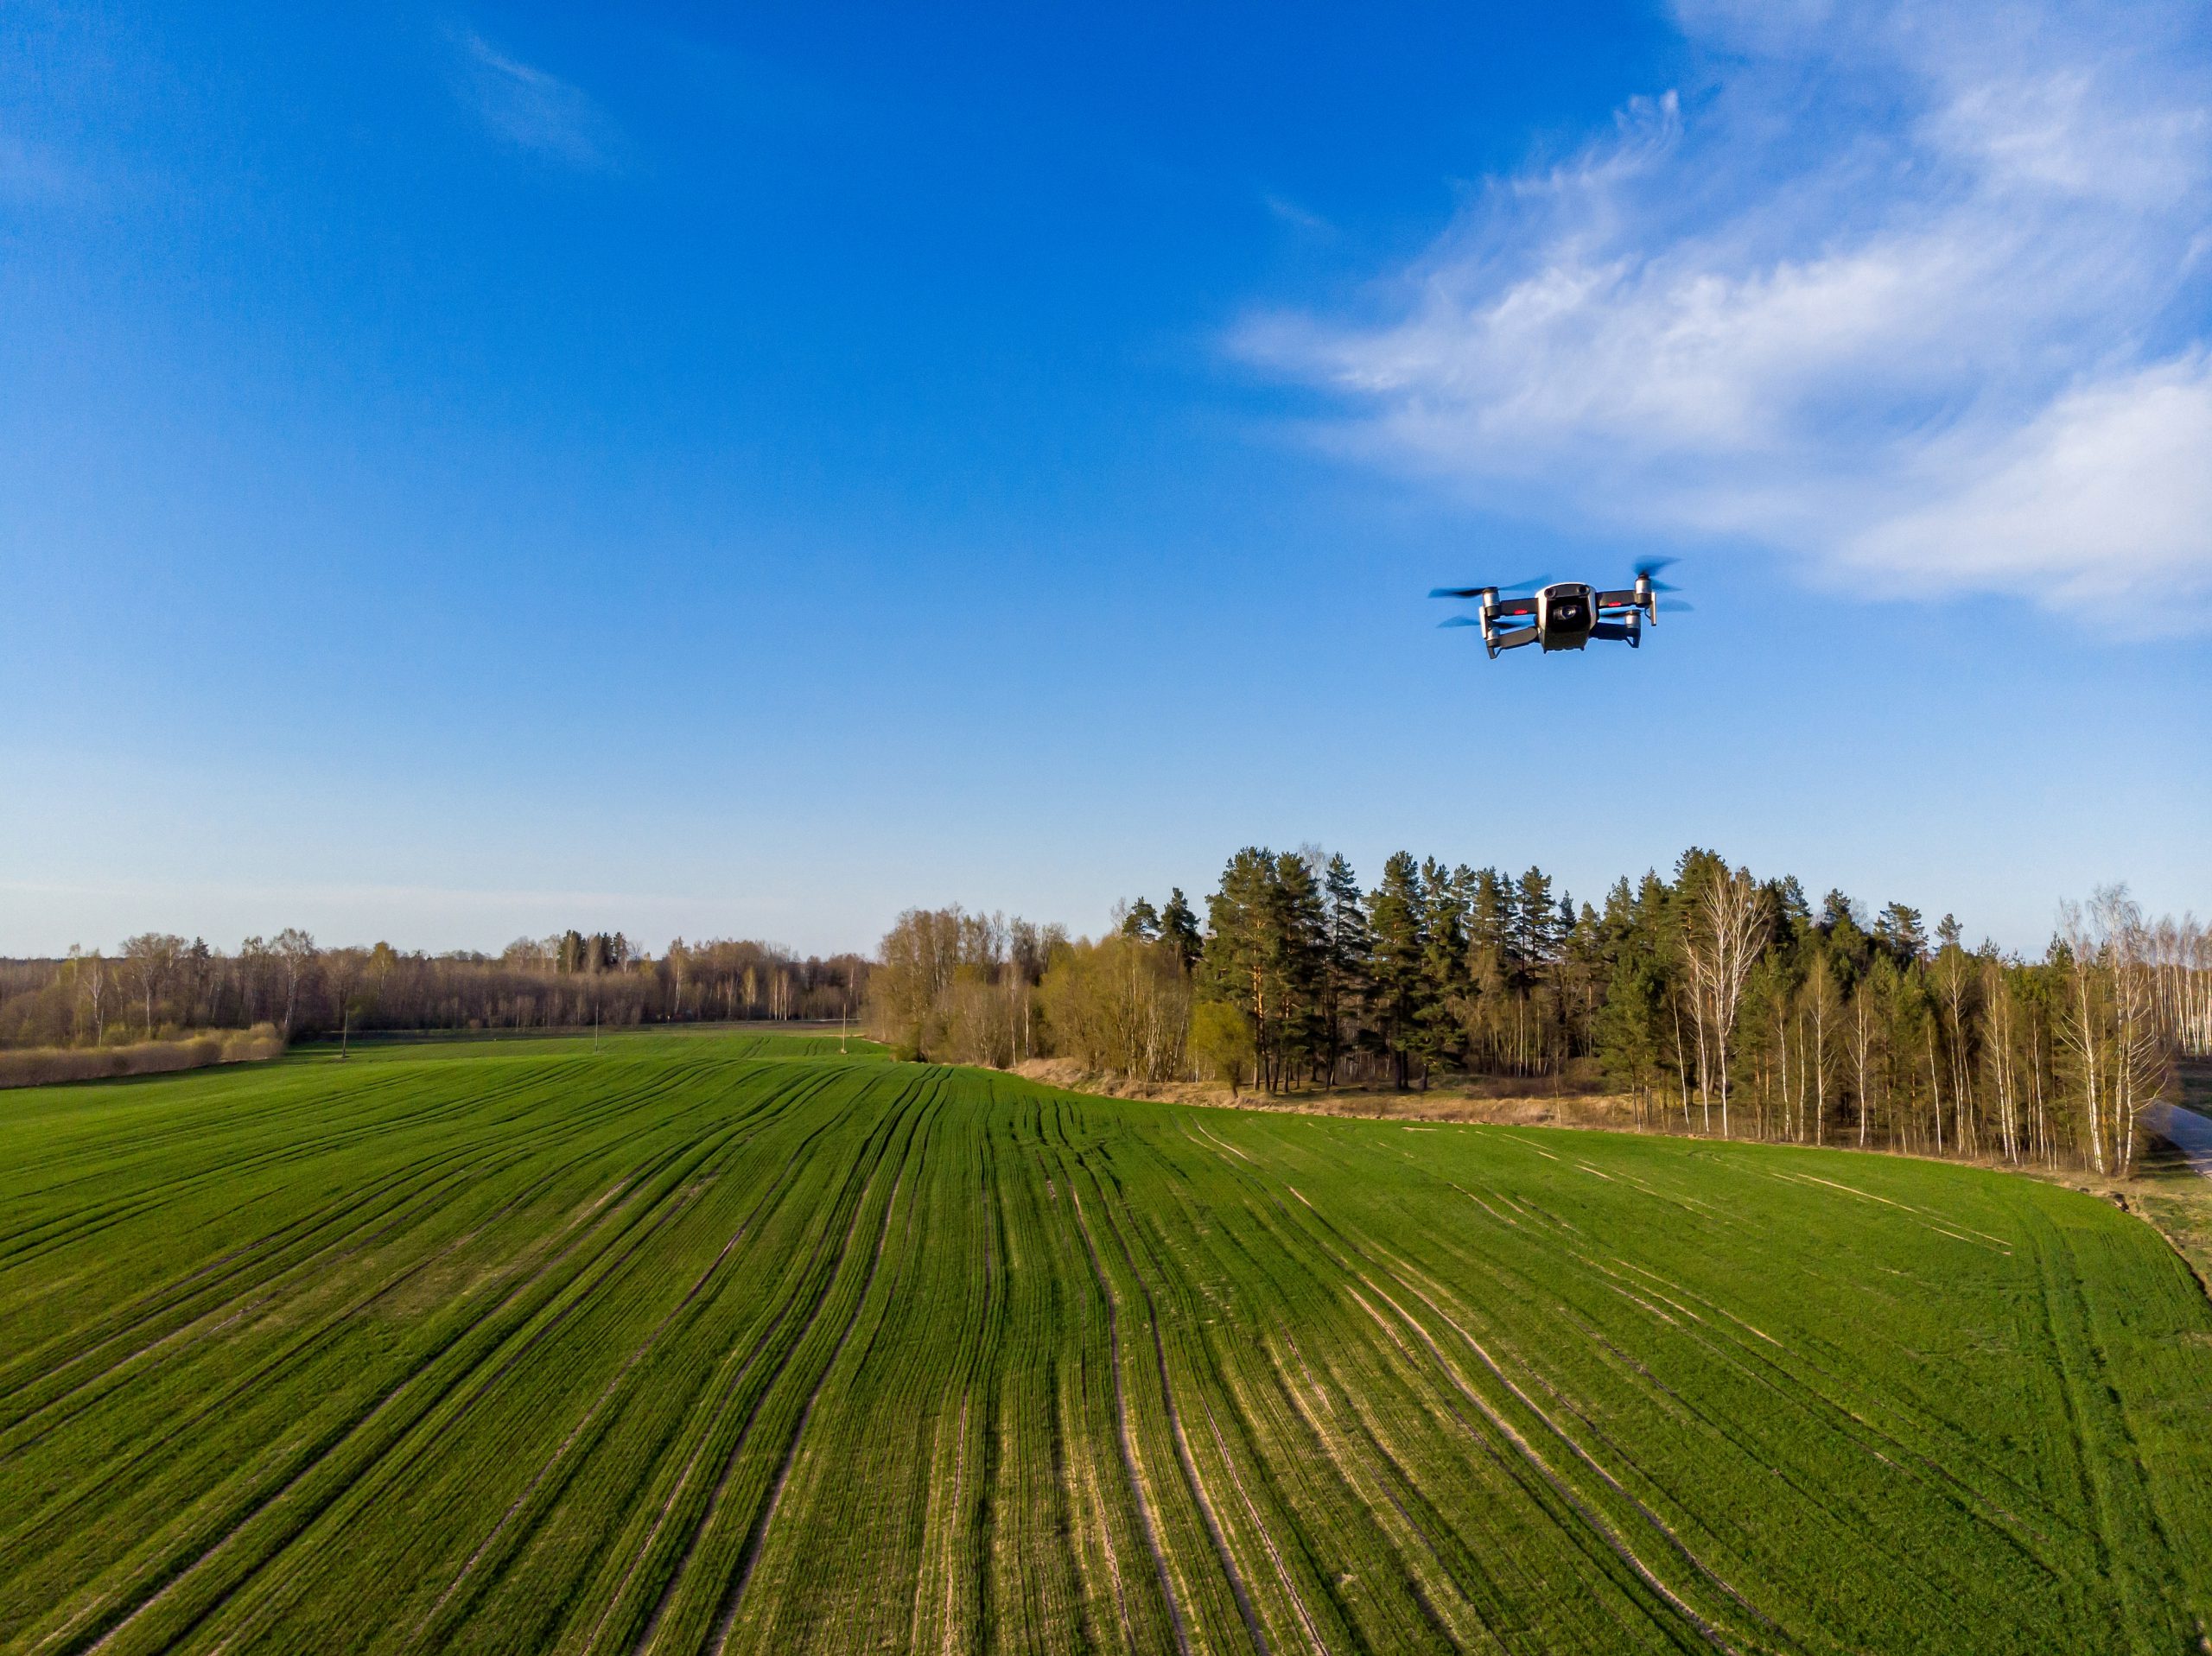 drone inspecting green agricultural fields in spring with fresh vegetation, aerial view, agriculture technology concept